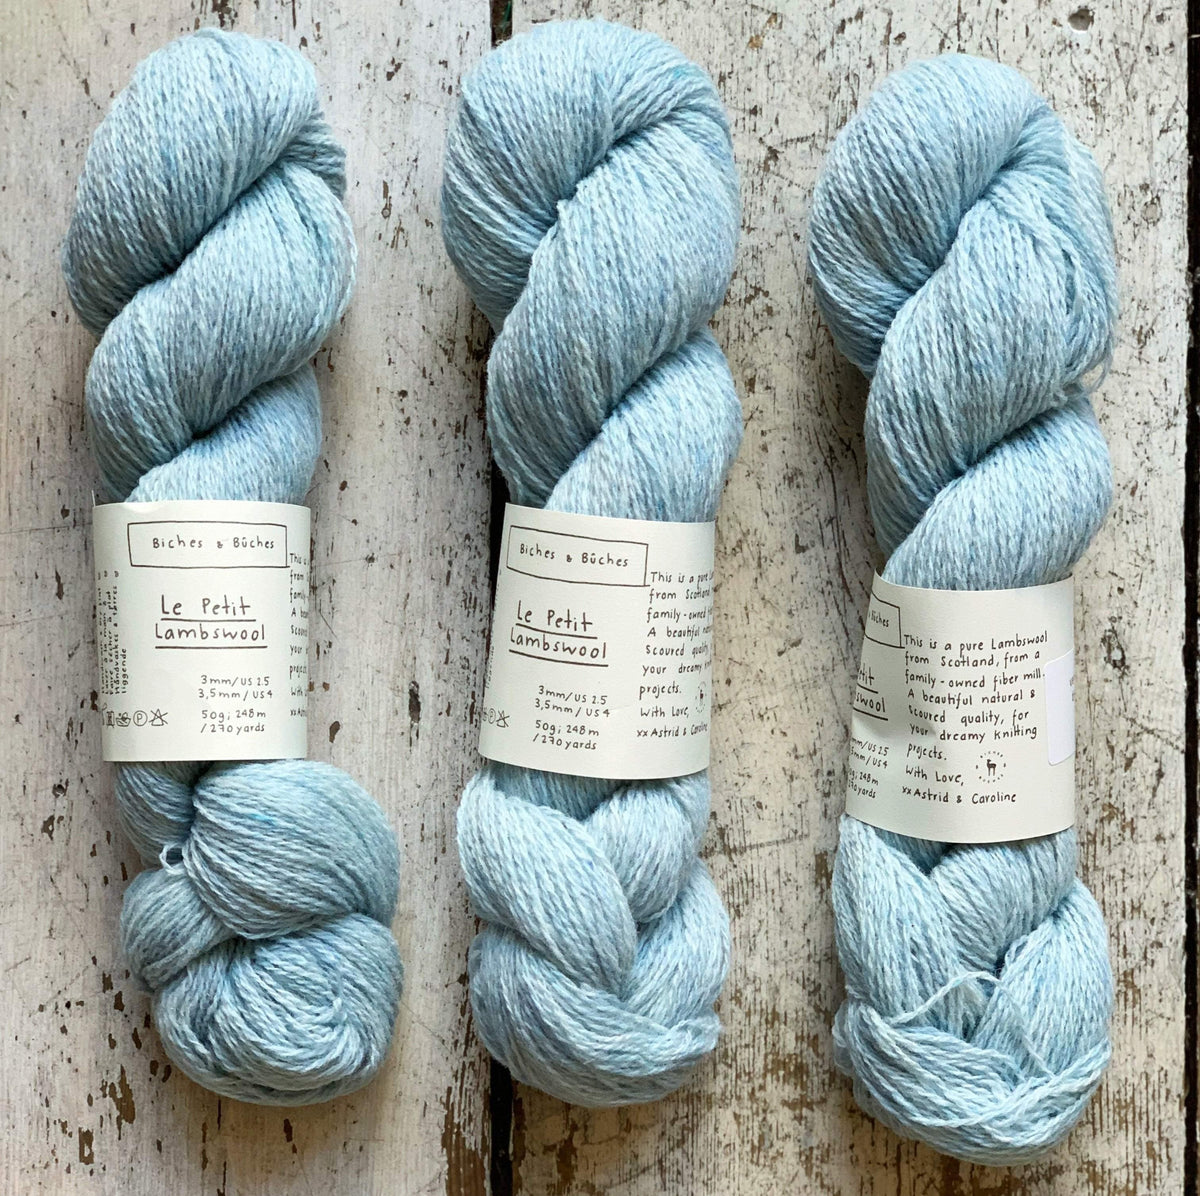 Biches & Bûches: Le Petit Lambswool | Tribe Yarns, London